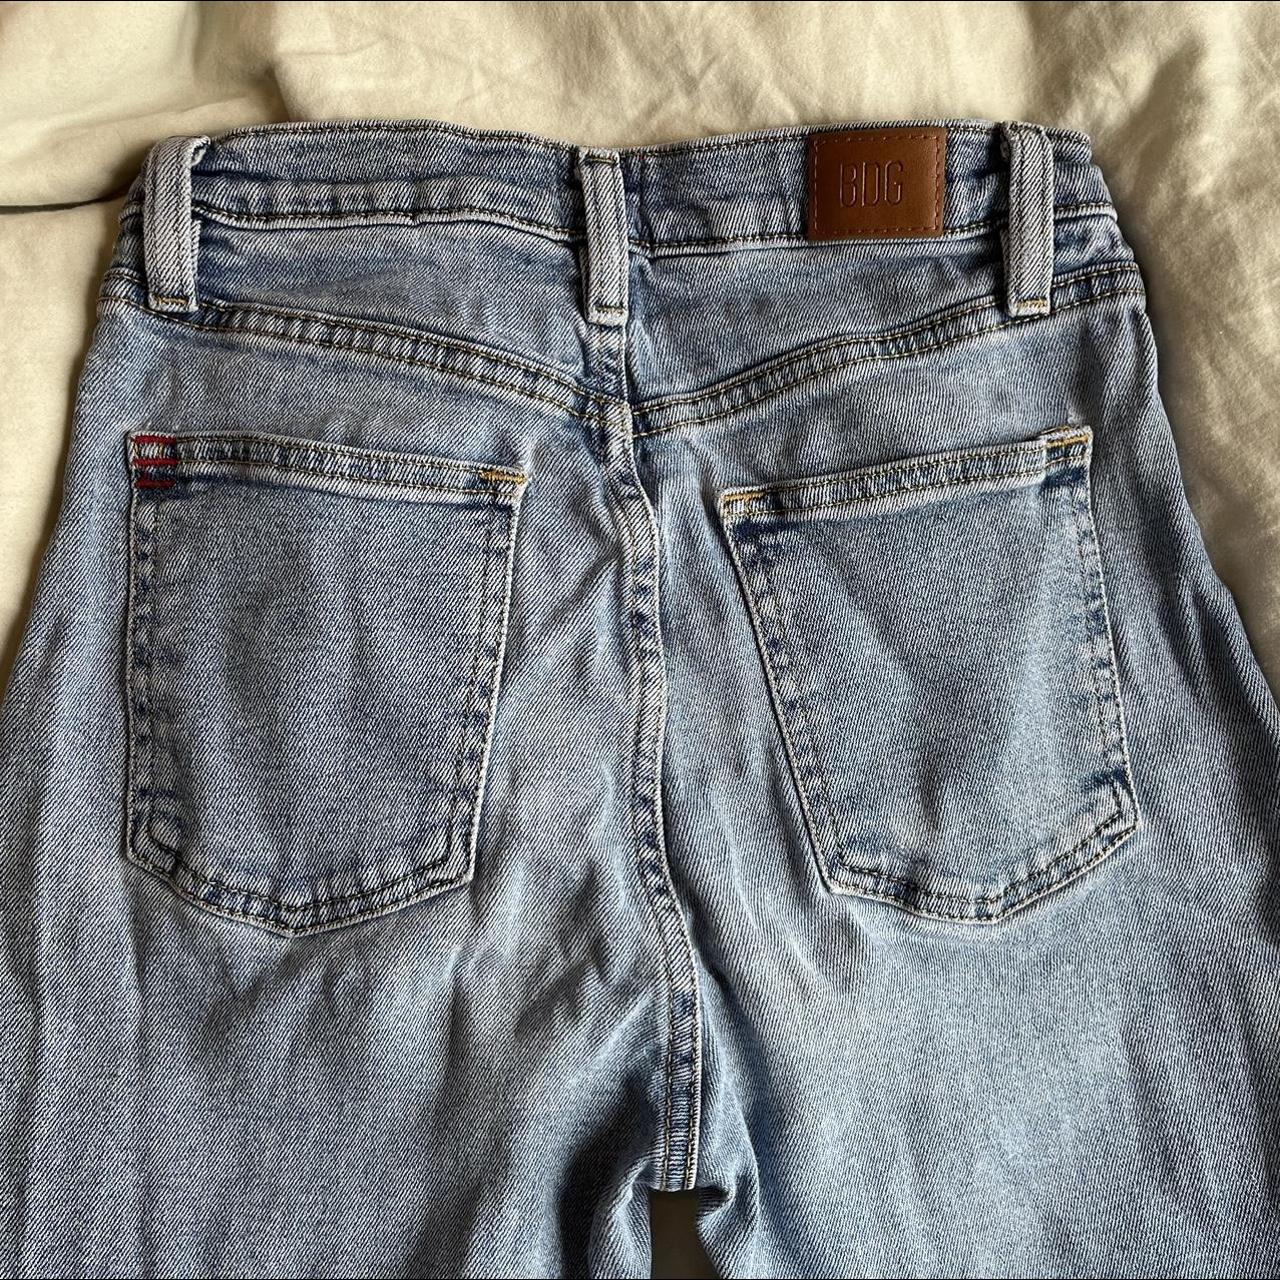 Urban Outfitters Women's Blue Jeans (4)